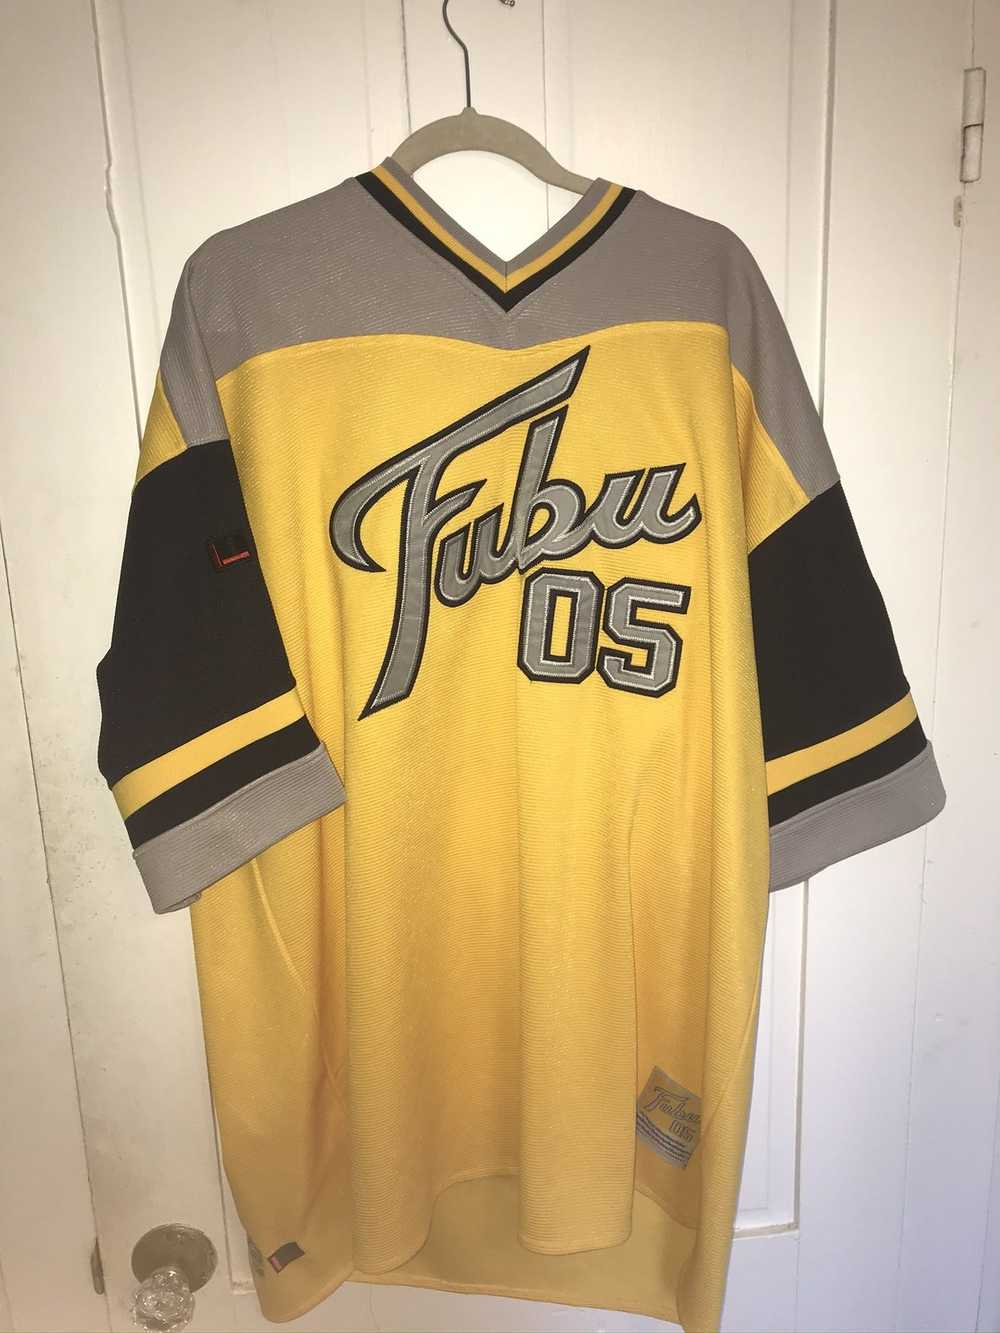 Fubu Jersey from 2005 collection - image 1